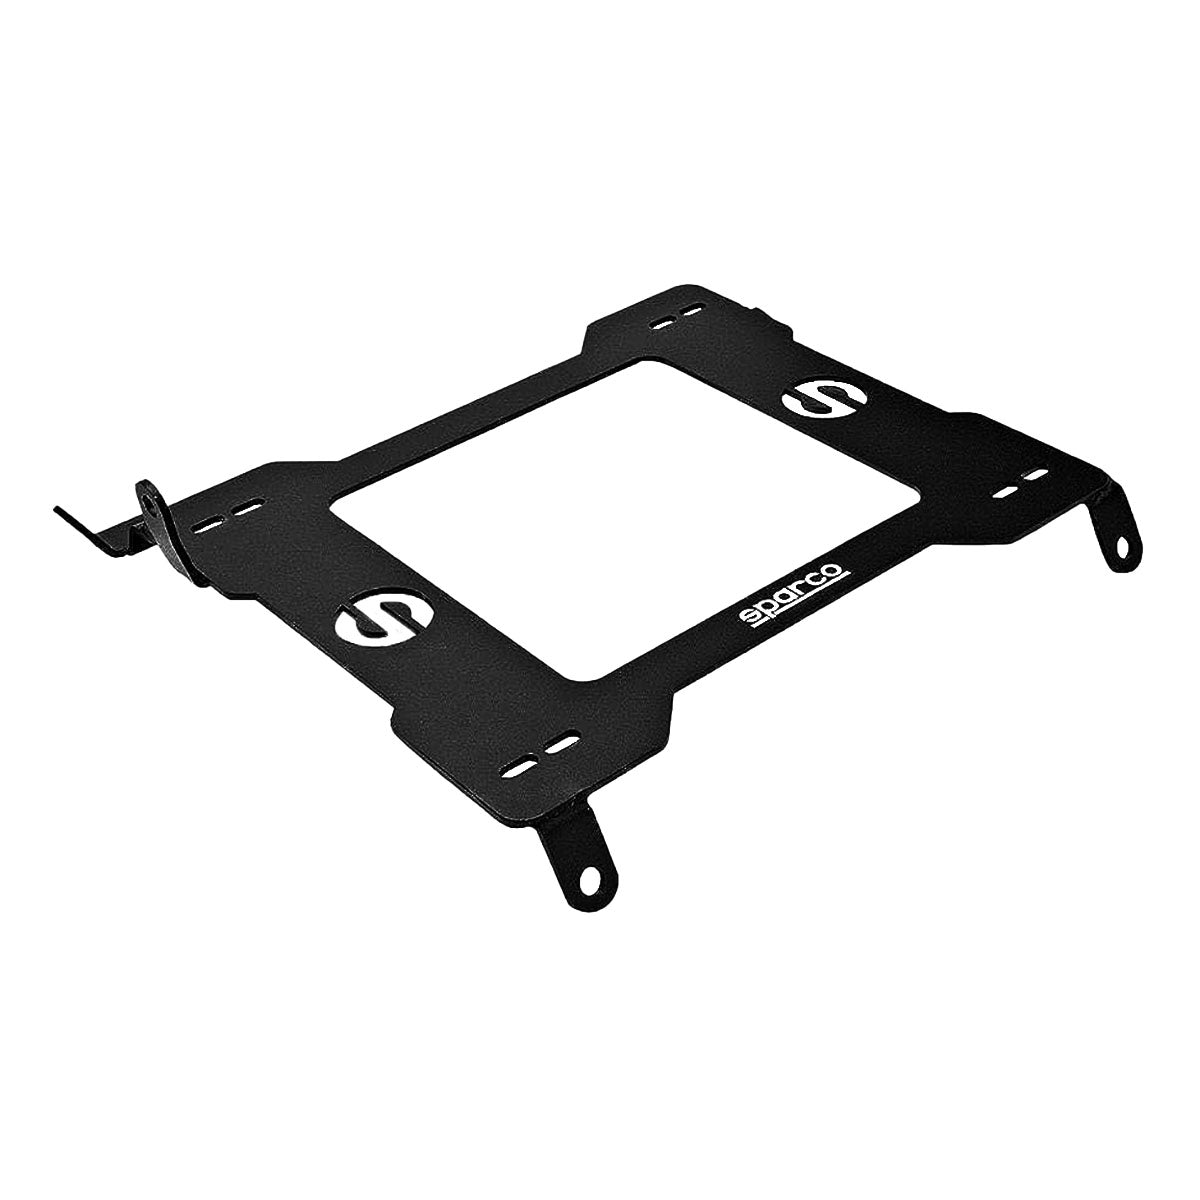 Sparco 600 Series racing seat mounting base install Sparco racing seat lowest price in stock now.